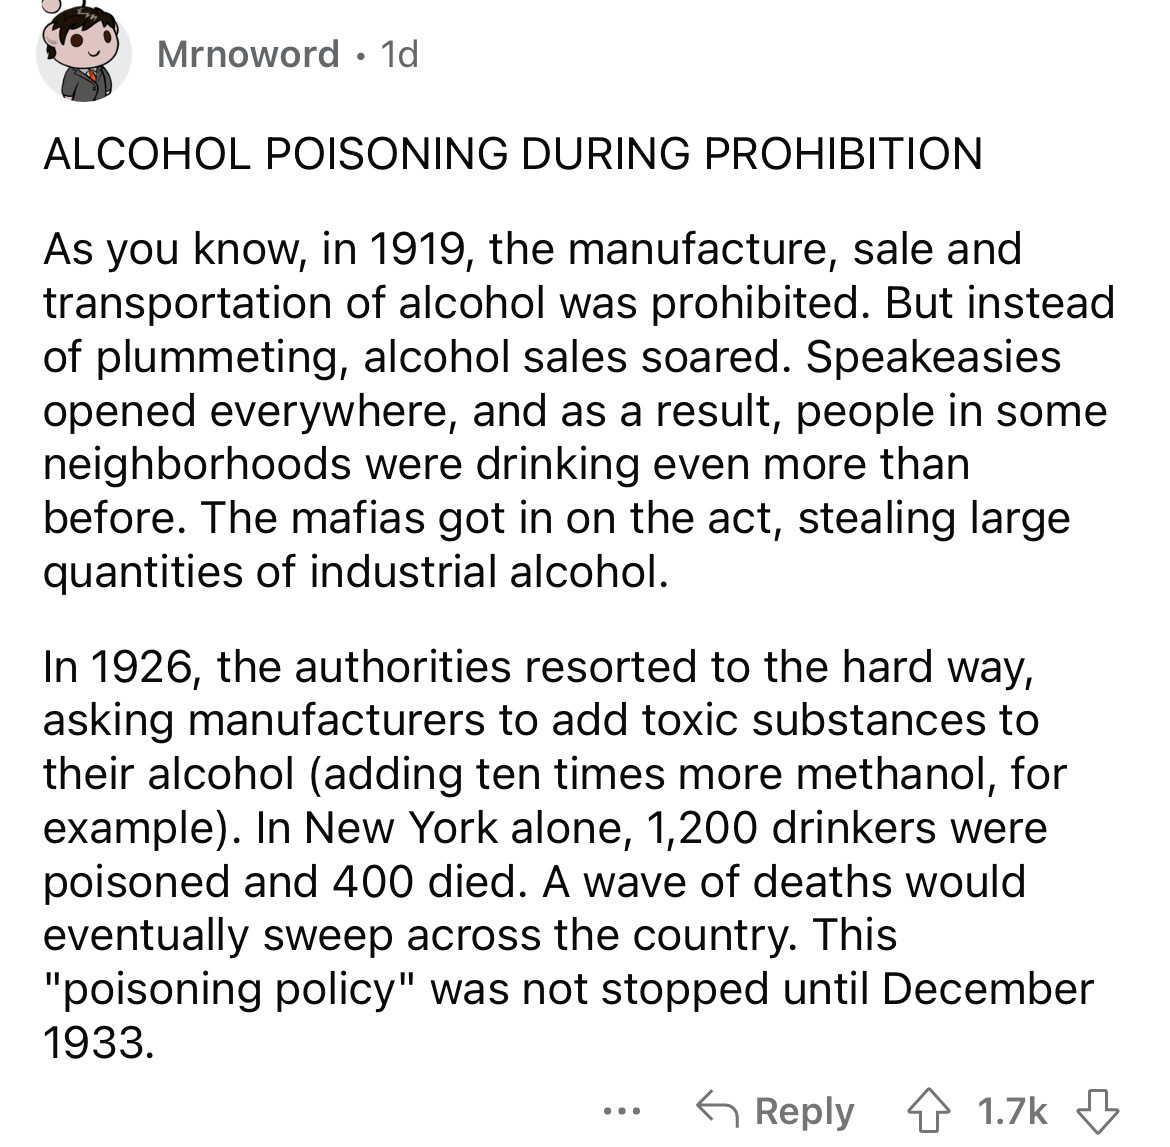 document - Mrnoword. 1d Alcohol Poisoning During Prohibition As you know, in 1919, the manufacture, sale and transportation of alcohol was prohibited. But instead of plummeting, alcohol sales soared. Speakeasies opened everywhere, and as a result, people 